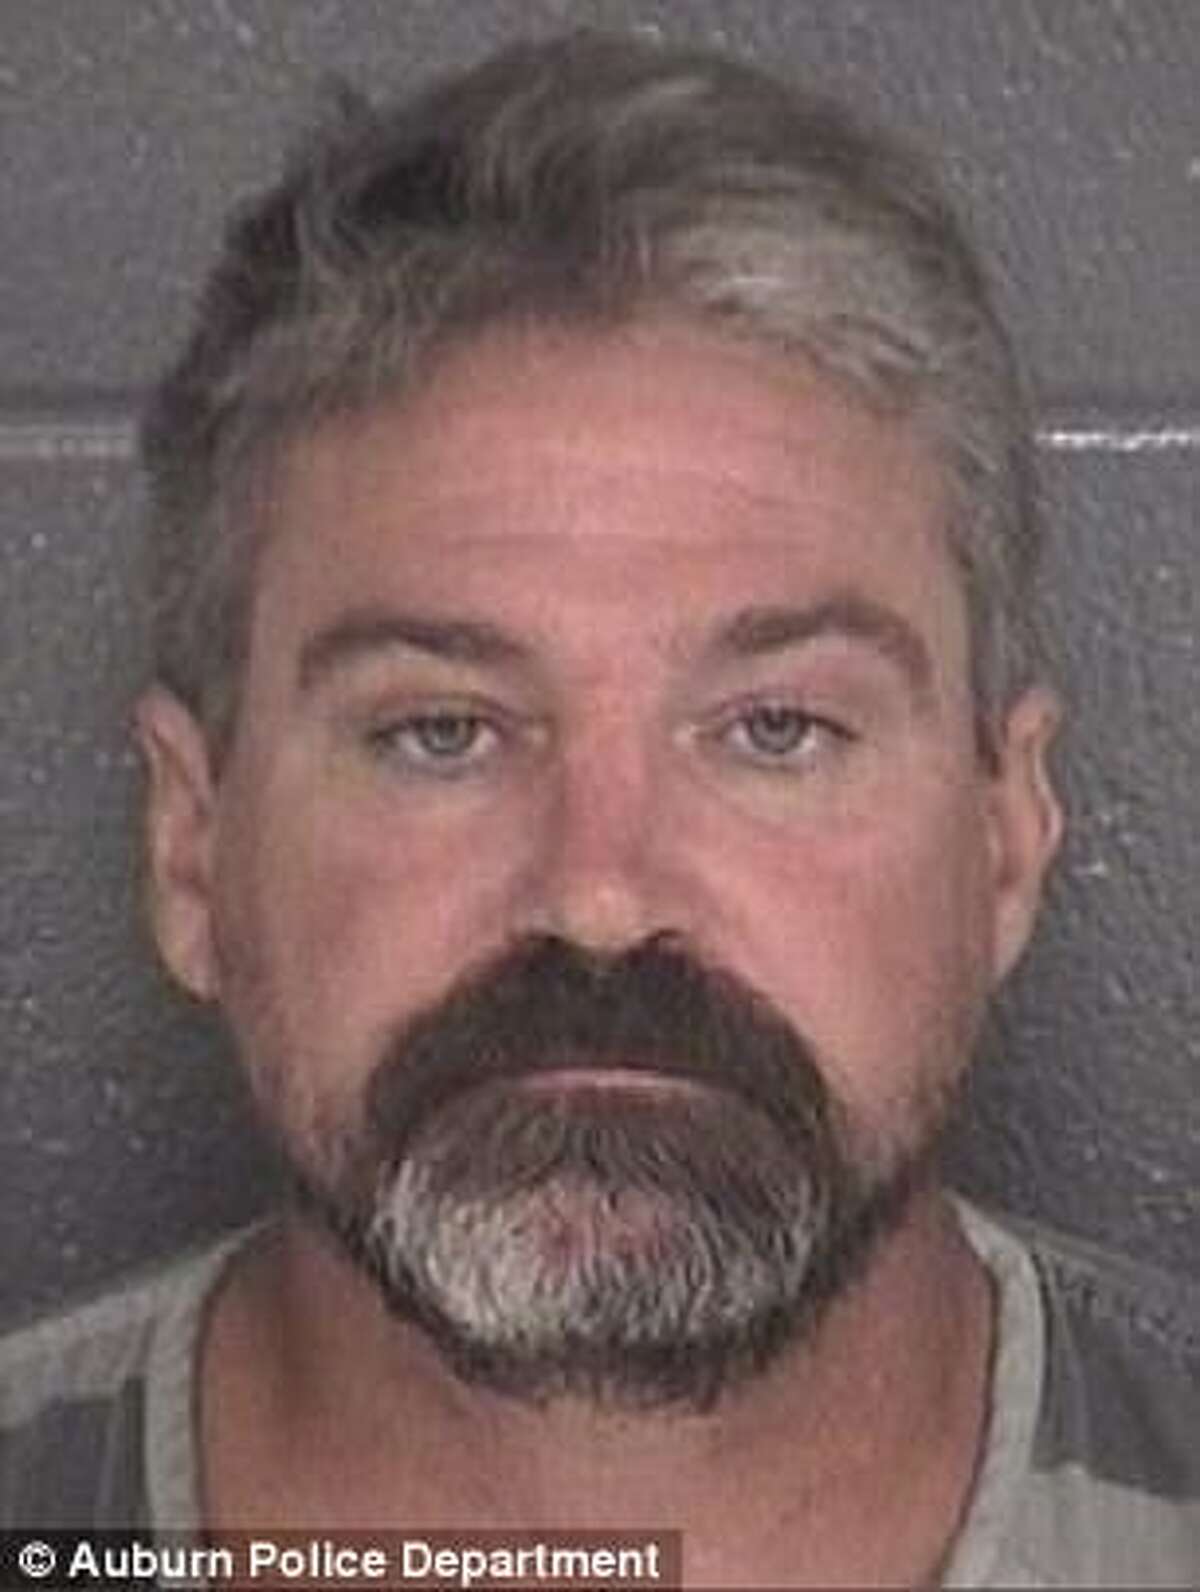 Larry Russel Bates, 46, confessed to killing his neighbor in Georgia in July of 2017 after believing his dog was leaving droppings in his yard.See who's been charged with murder in Houston ahead. 